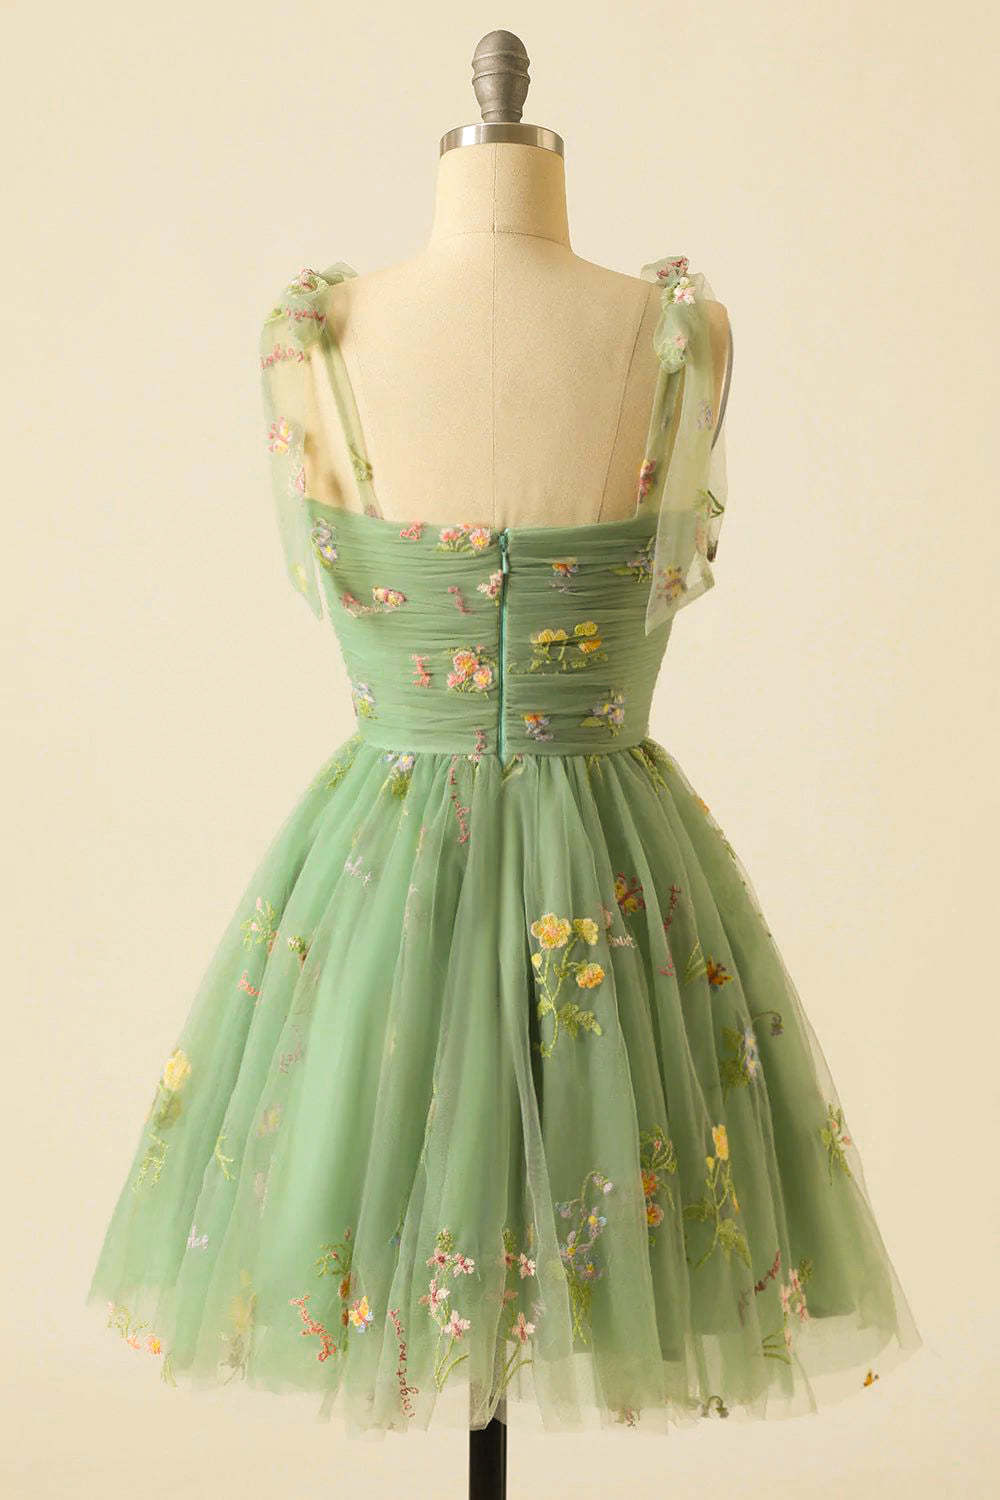 Cute Princess Green Embroidery Tulle Short Homecoming Dress